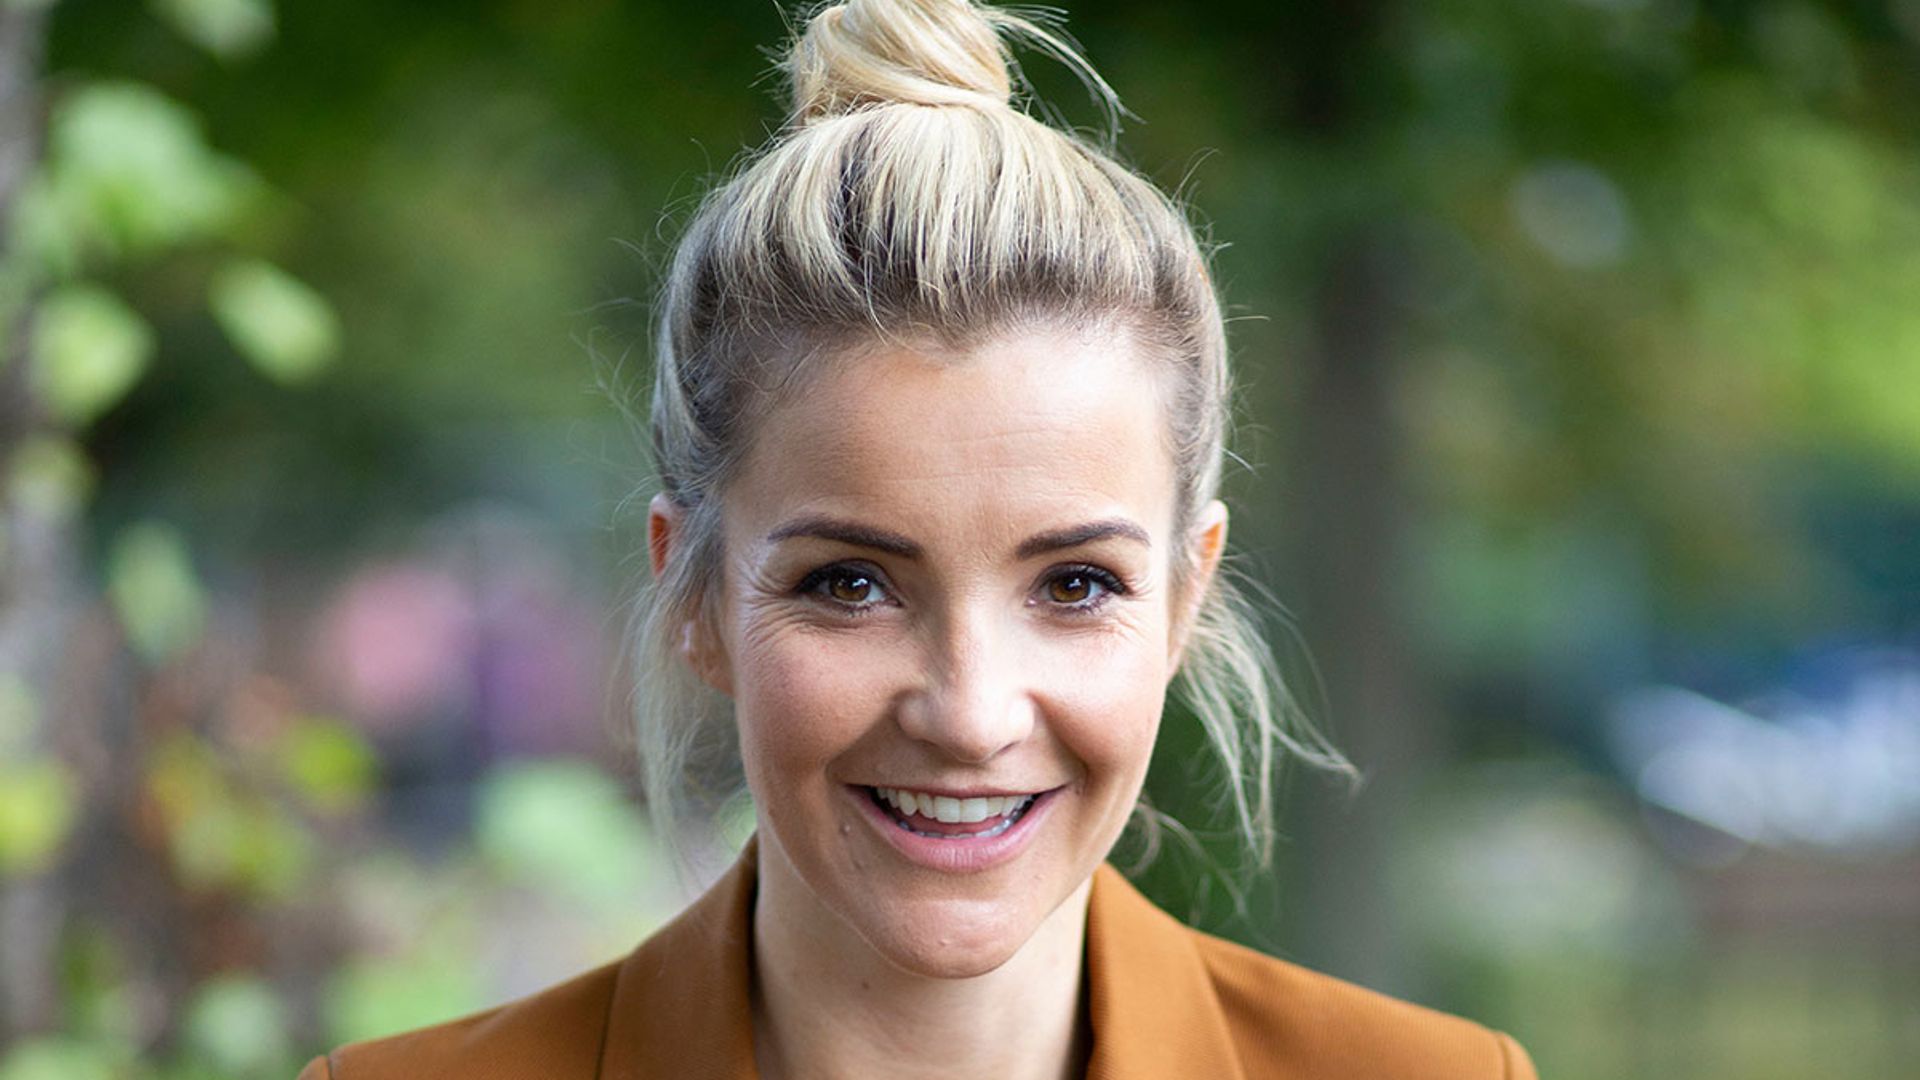 Helen Skelton snuggles up to baby daughter in sweet new photo after making TV comeback following split